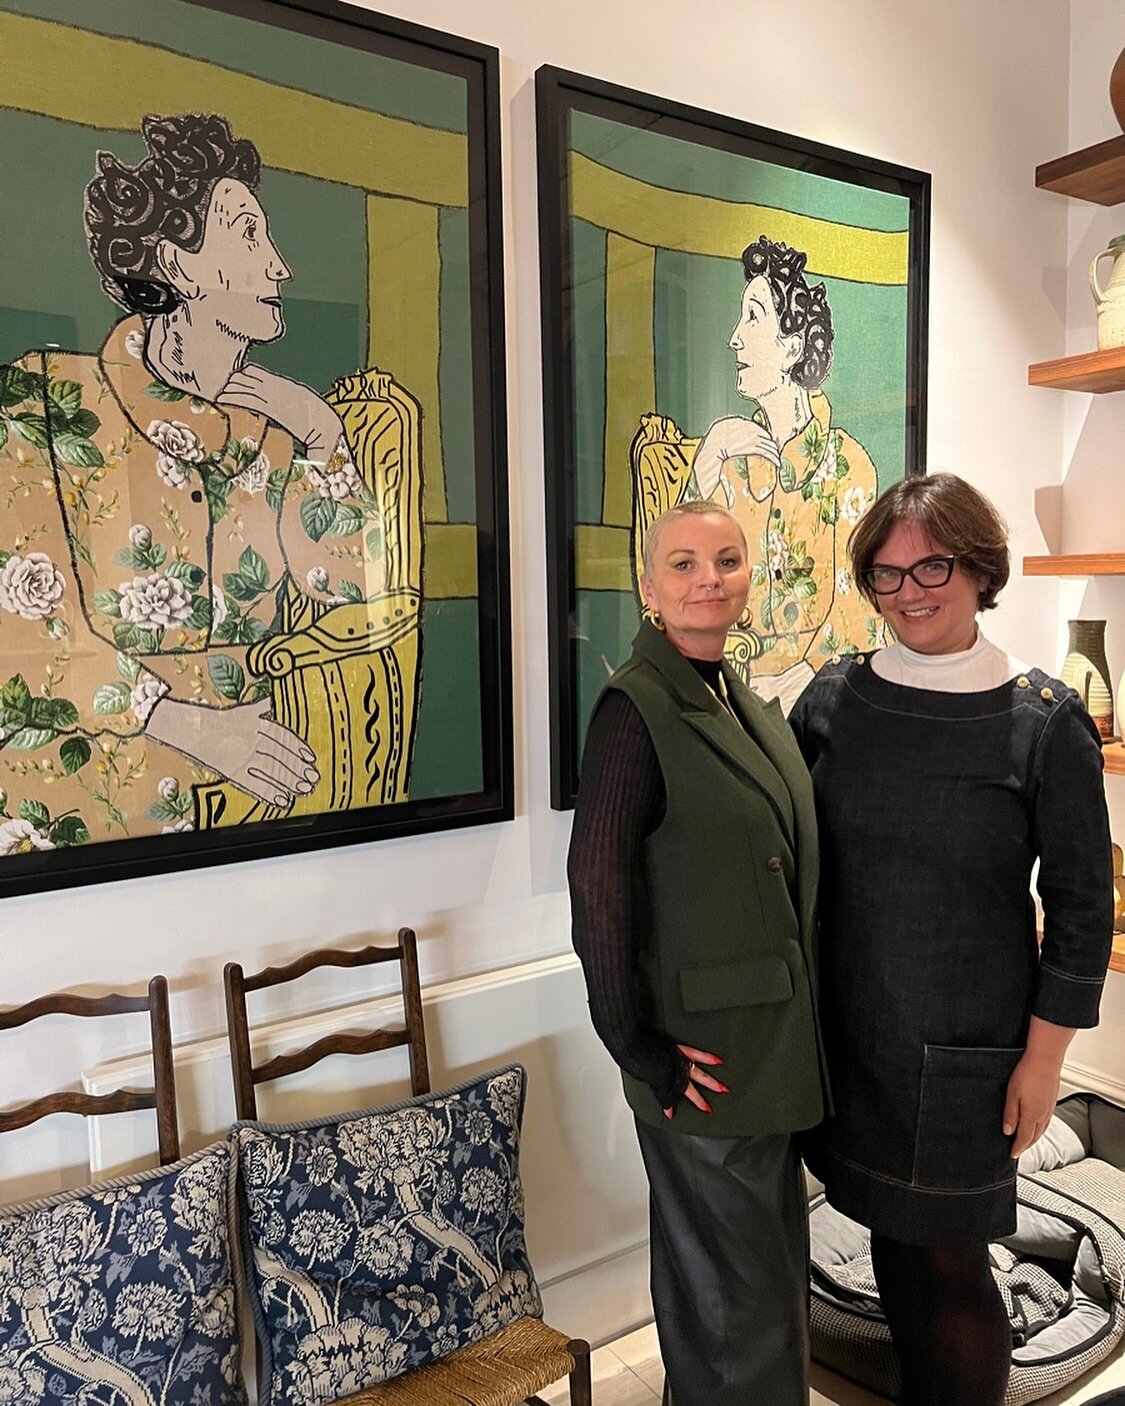 Had the pleasure of visiting Imogen Hogan at her home/studio. Everything I remembered her art being when I first saw it last year. Incredibly powerful, thought provoking, story telling tapestries. We are super excited to be exhibiting @imogenhoganstu